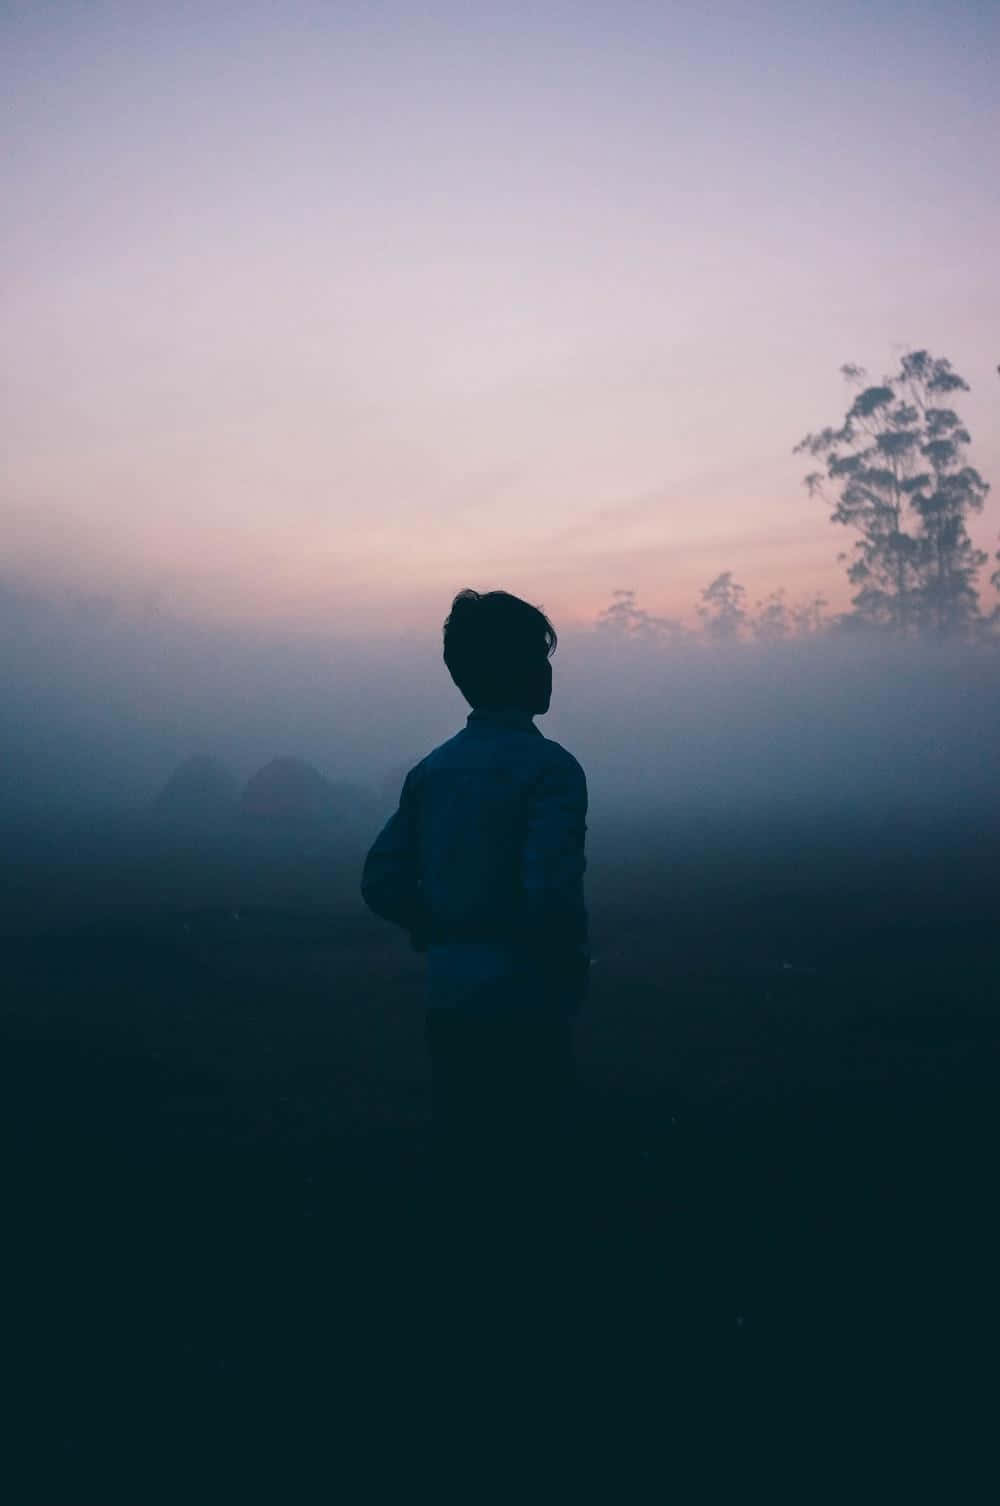 Sad Person Silhouette With Fog Picture